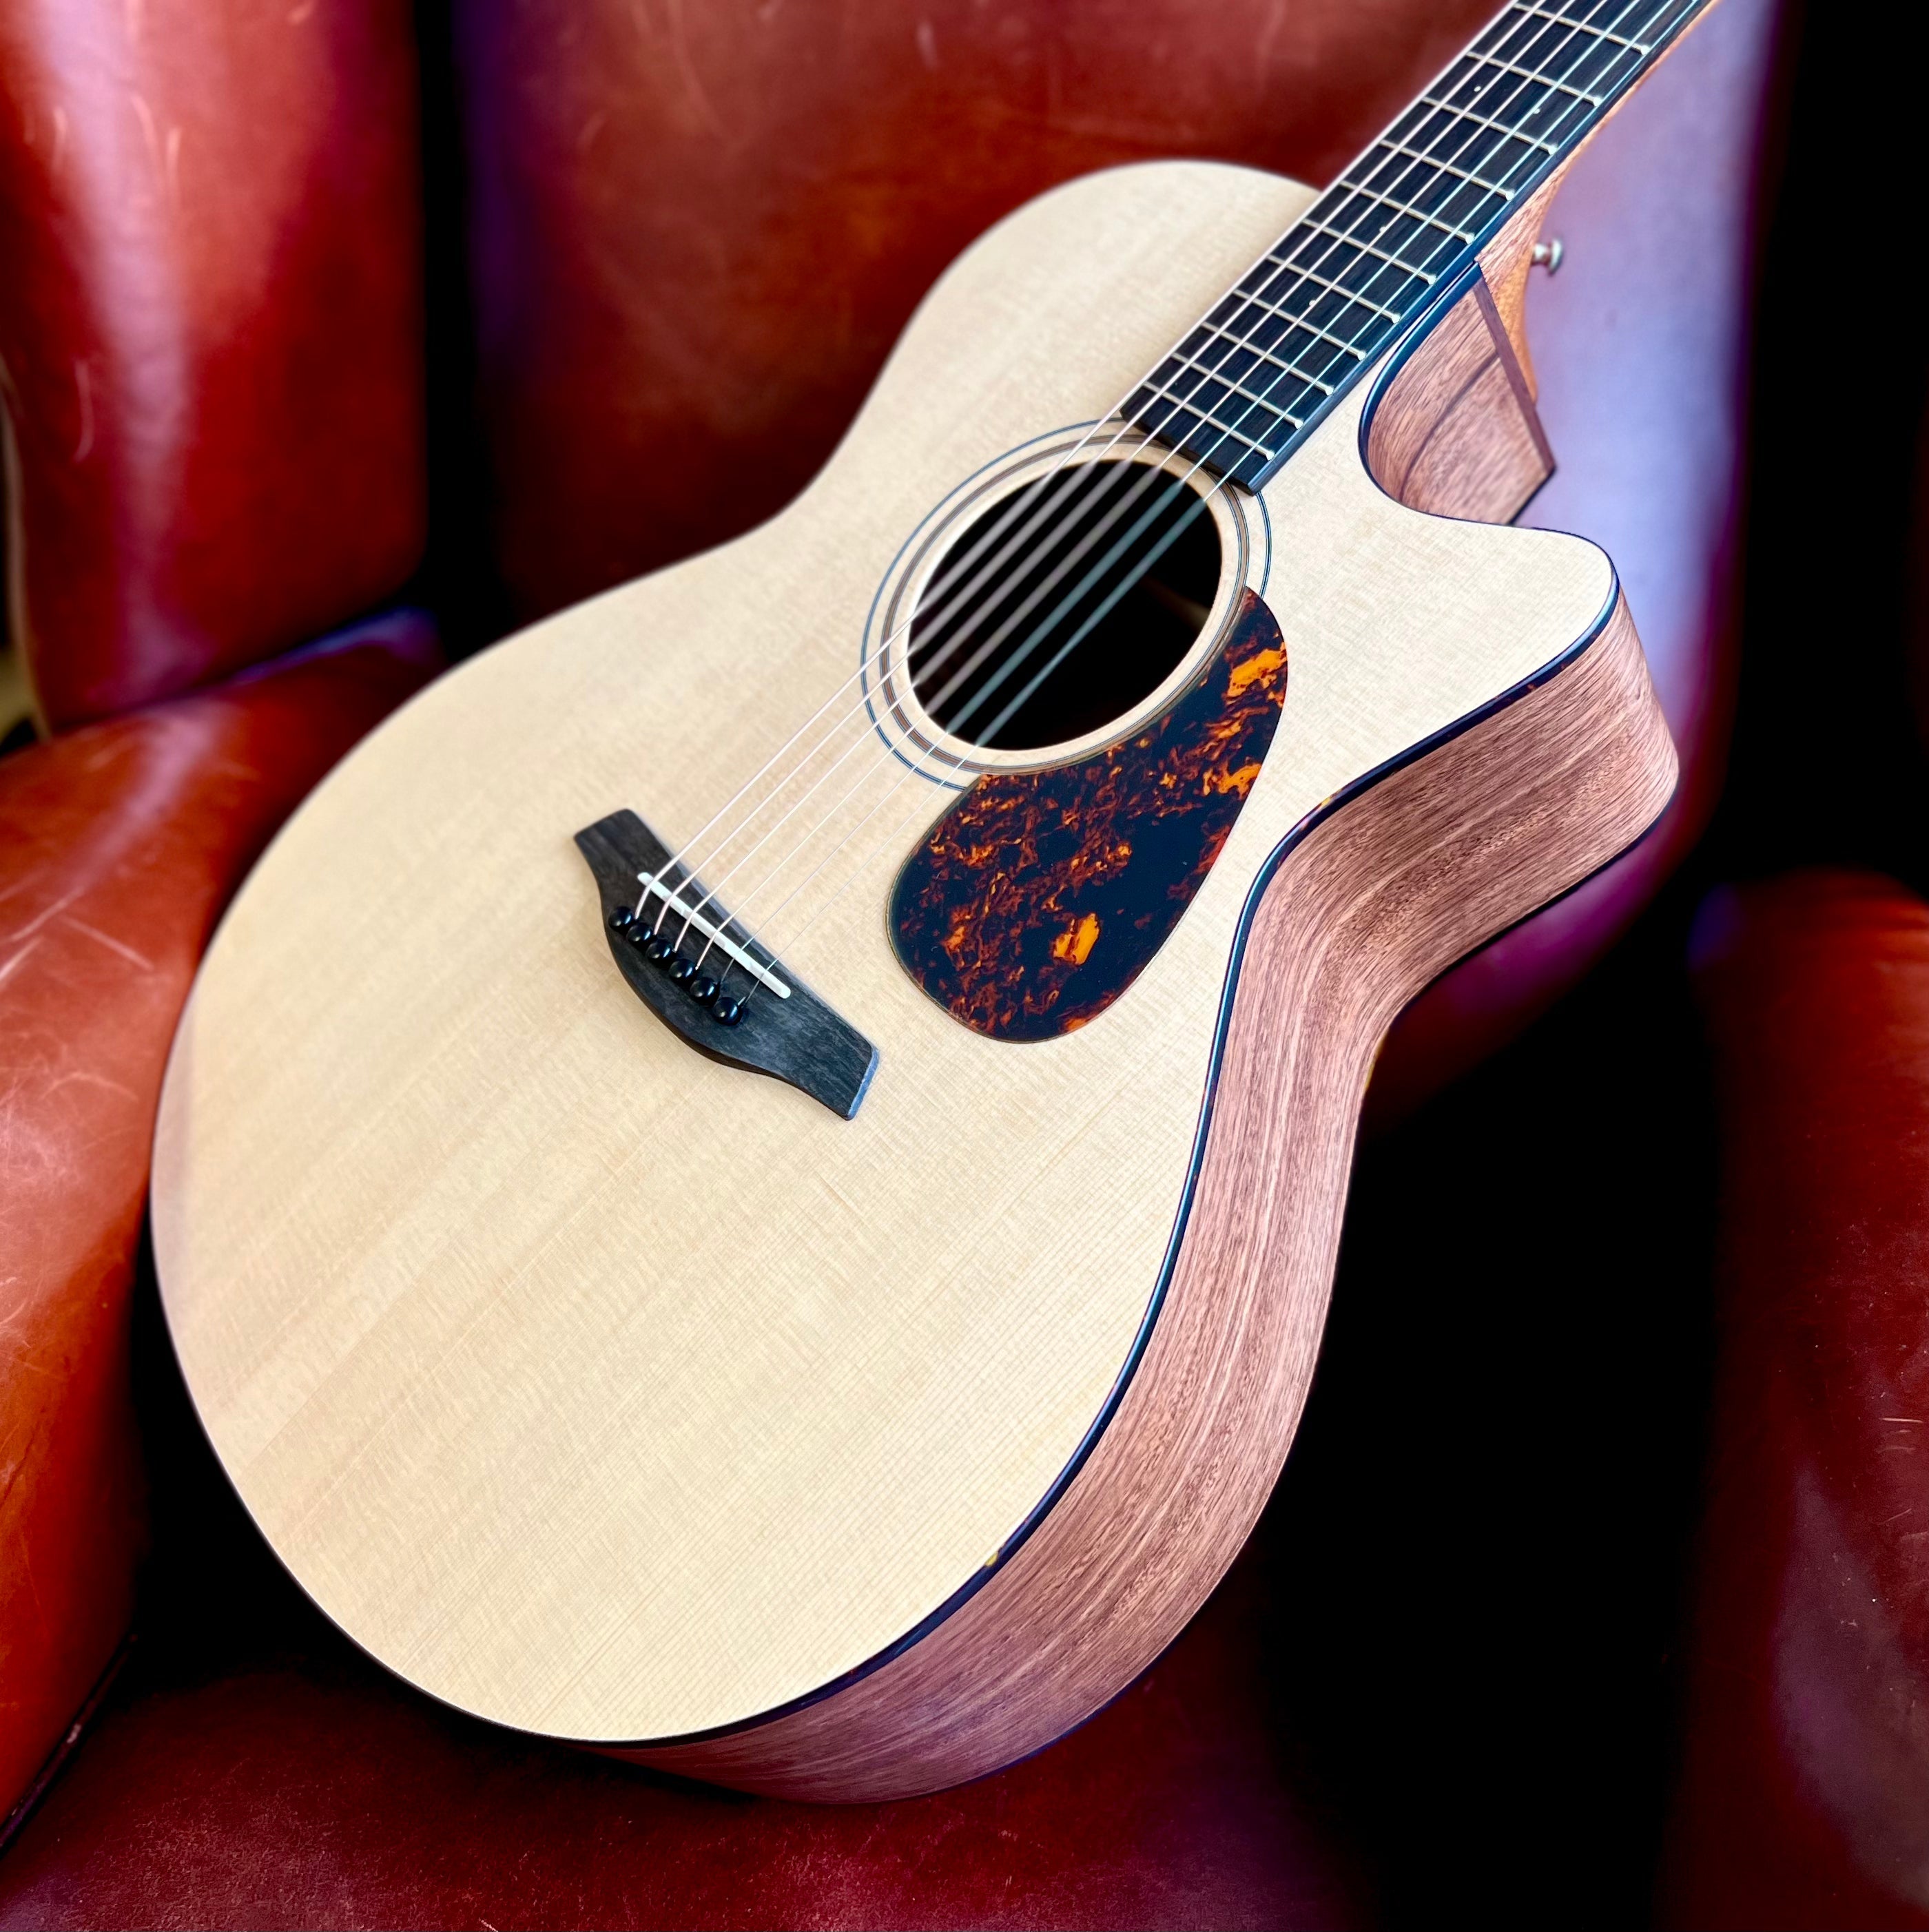 Furch Blue GC SW (Spruce / Walnut / Cutaway) Acoustic Guitar, Acoustic Guitar for sale at Richards Guitars.